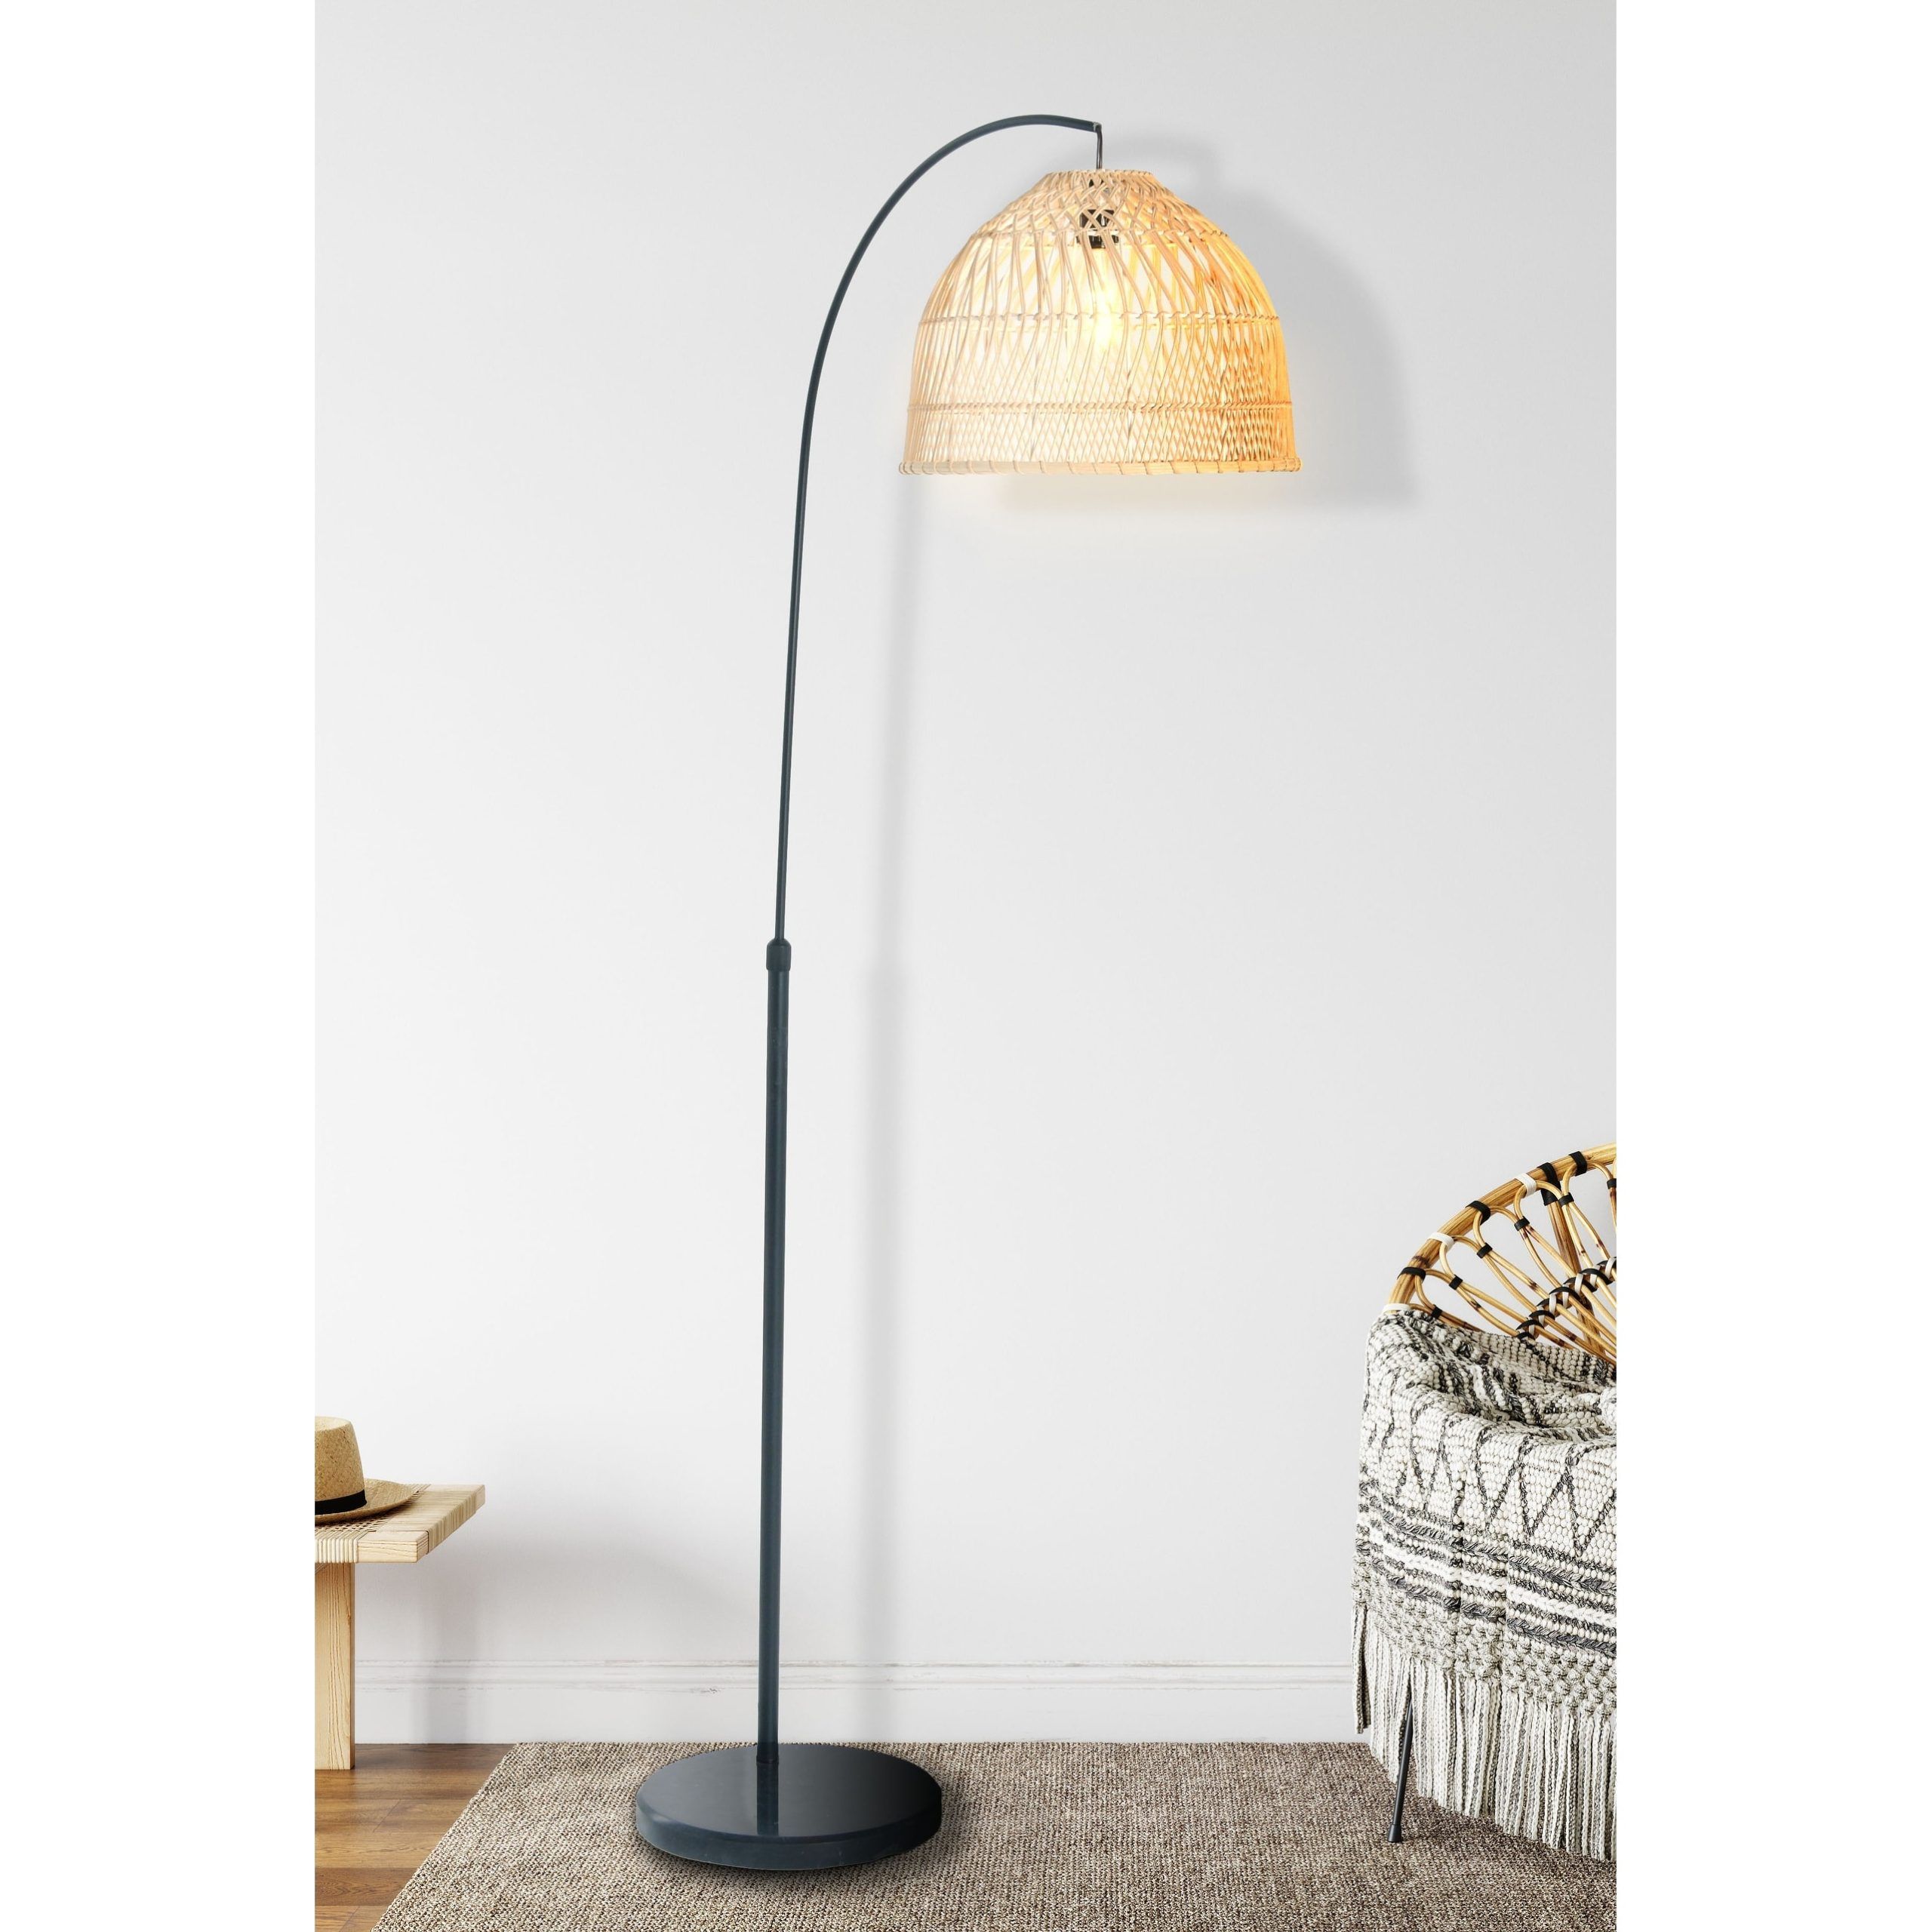 Arched Floor Lamp With Woven Rattan Shade – Overstock – 33638559 With Woven Cane Floor Lamps (View 14 of 15)